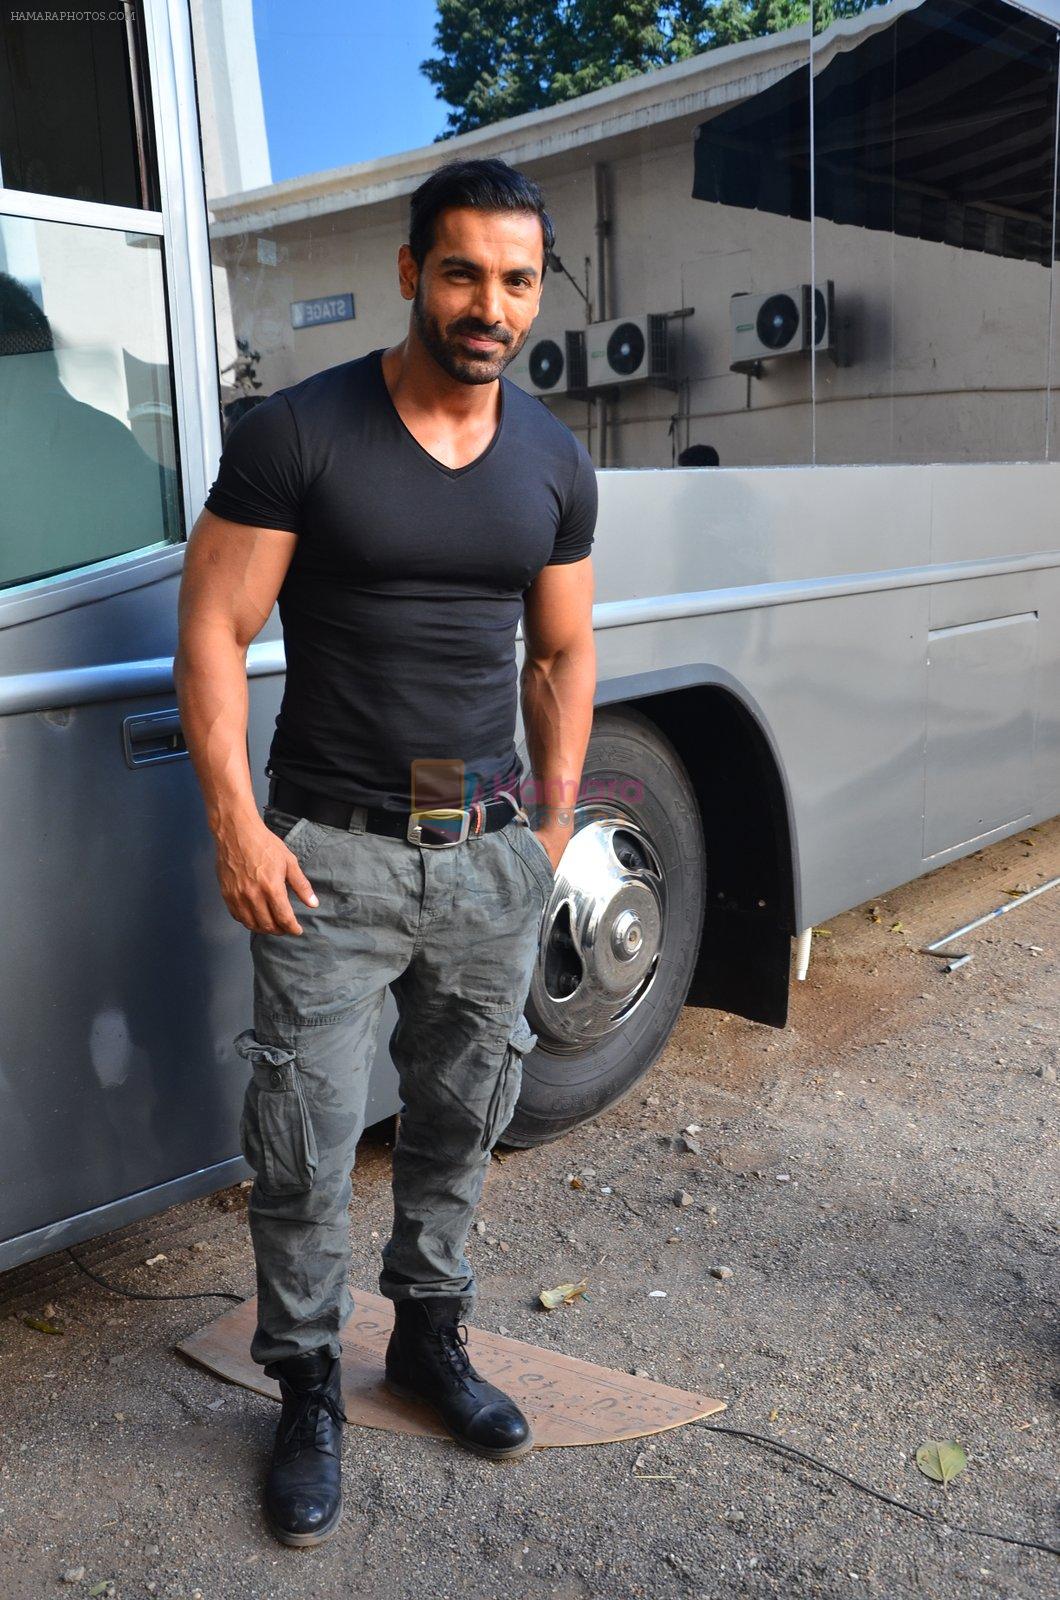 John Abraham snapped in Mumbai on 16th March 2016